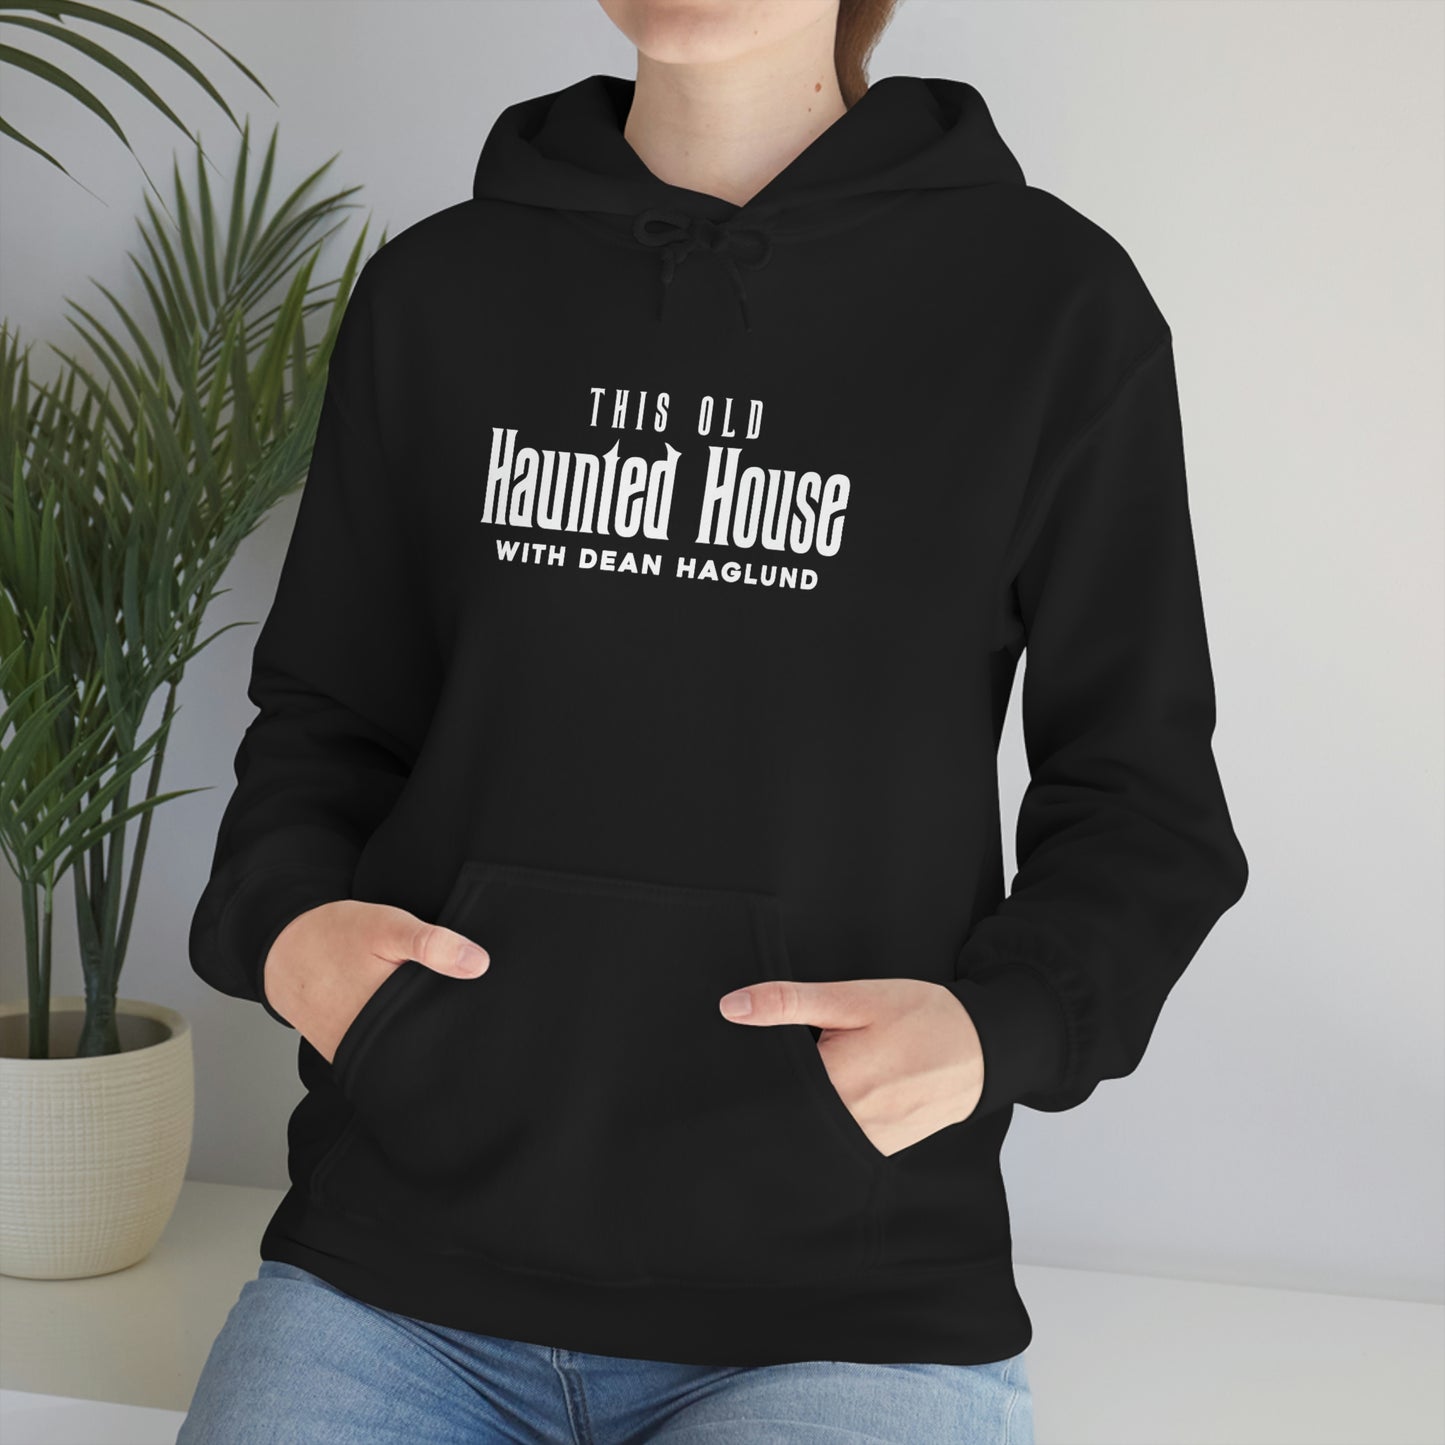 This Old Haunted House Unisex Heavy Blend™ Hooded Sweatshirt